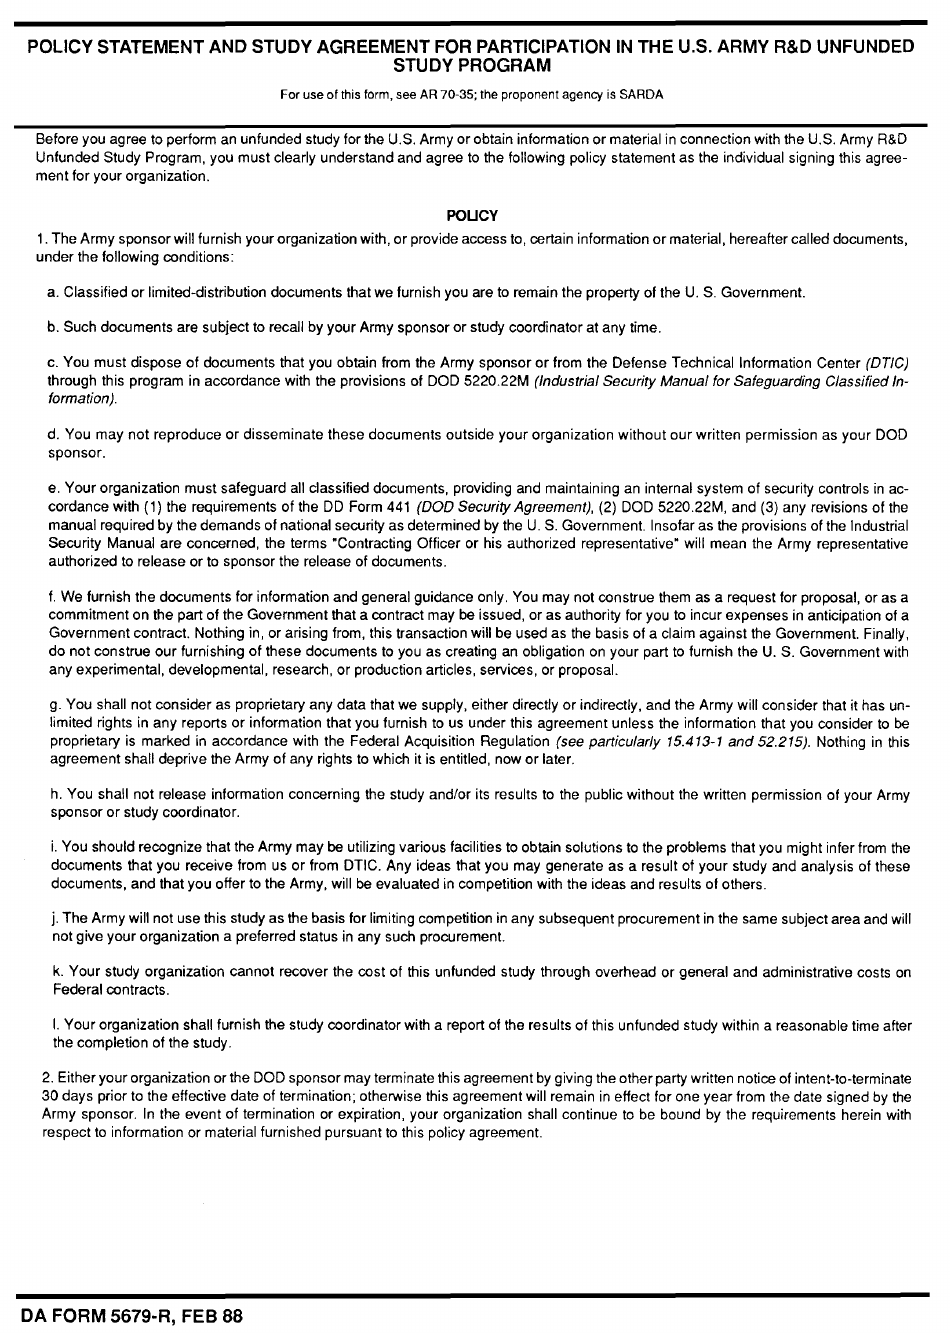 DA Form 5679-R Policy Statement and Study Agreement for Participation in the U.S. Army Rd Unfunded Study Program, Page 1